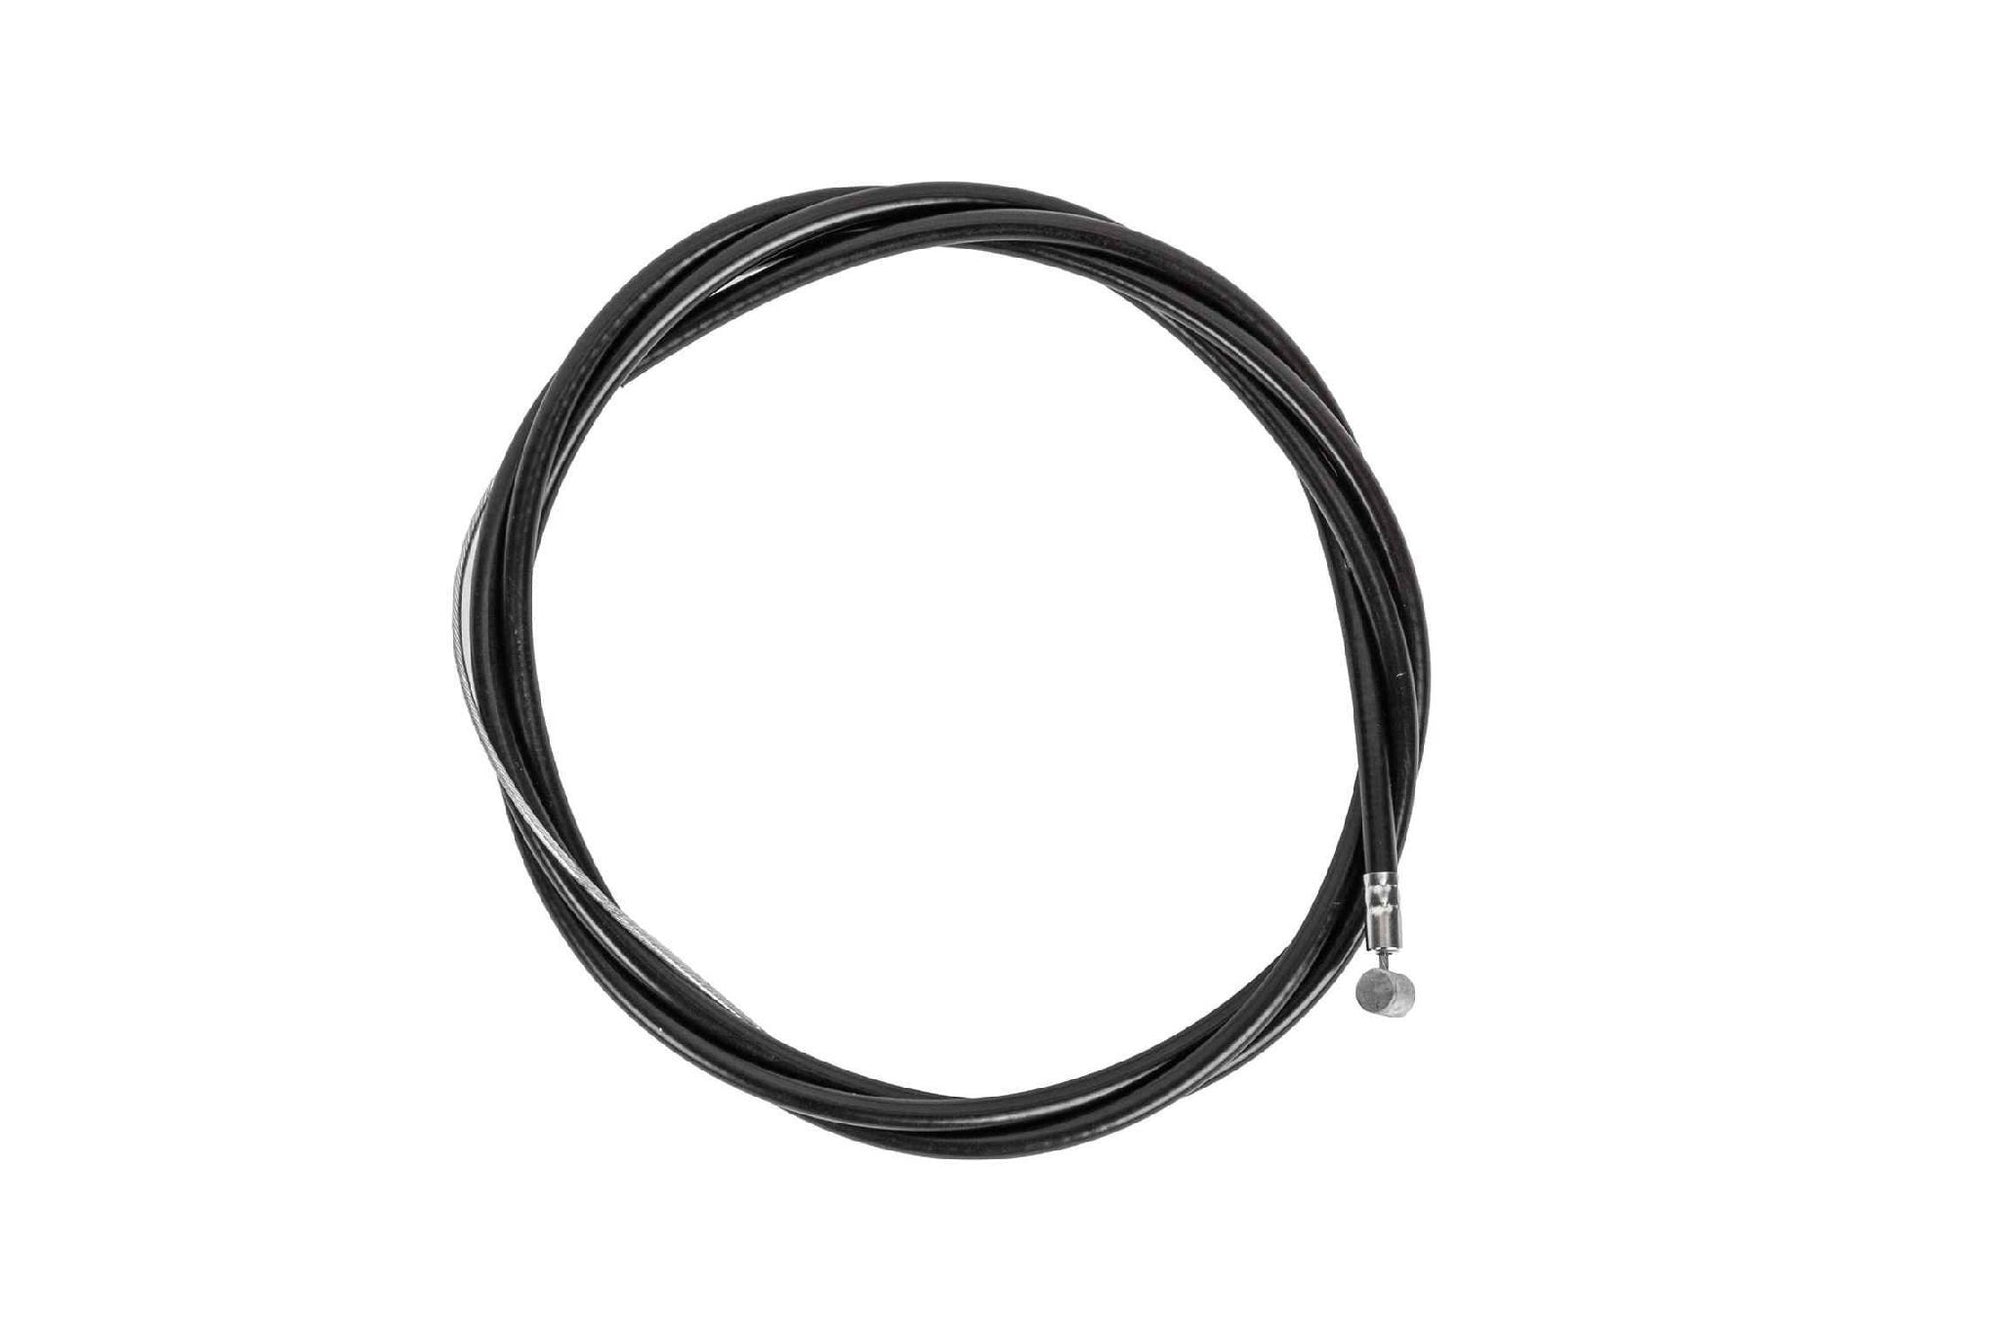 Odyssey Slic Kable Brake Cable - 1.5 Or 1.8mm - Downtown Bicycle Works 